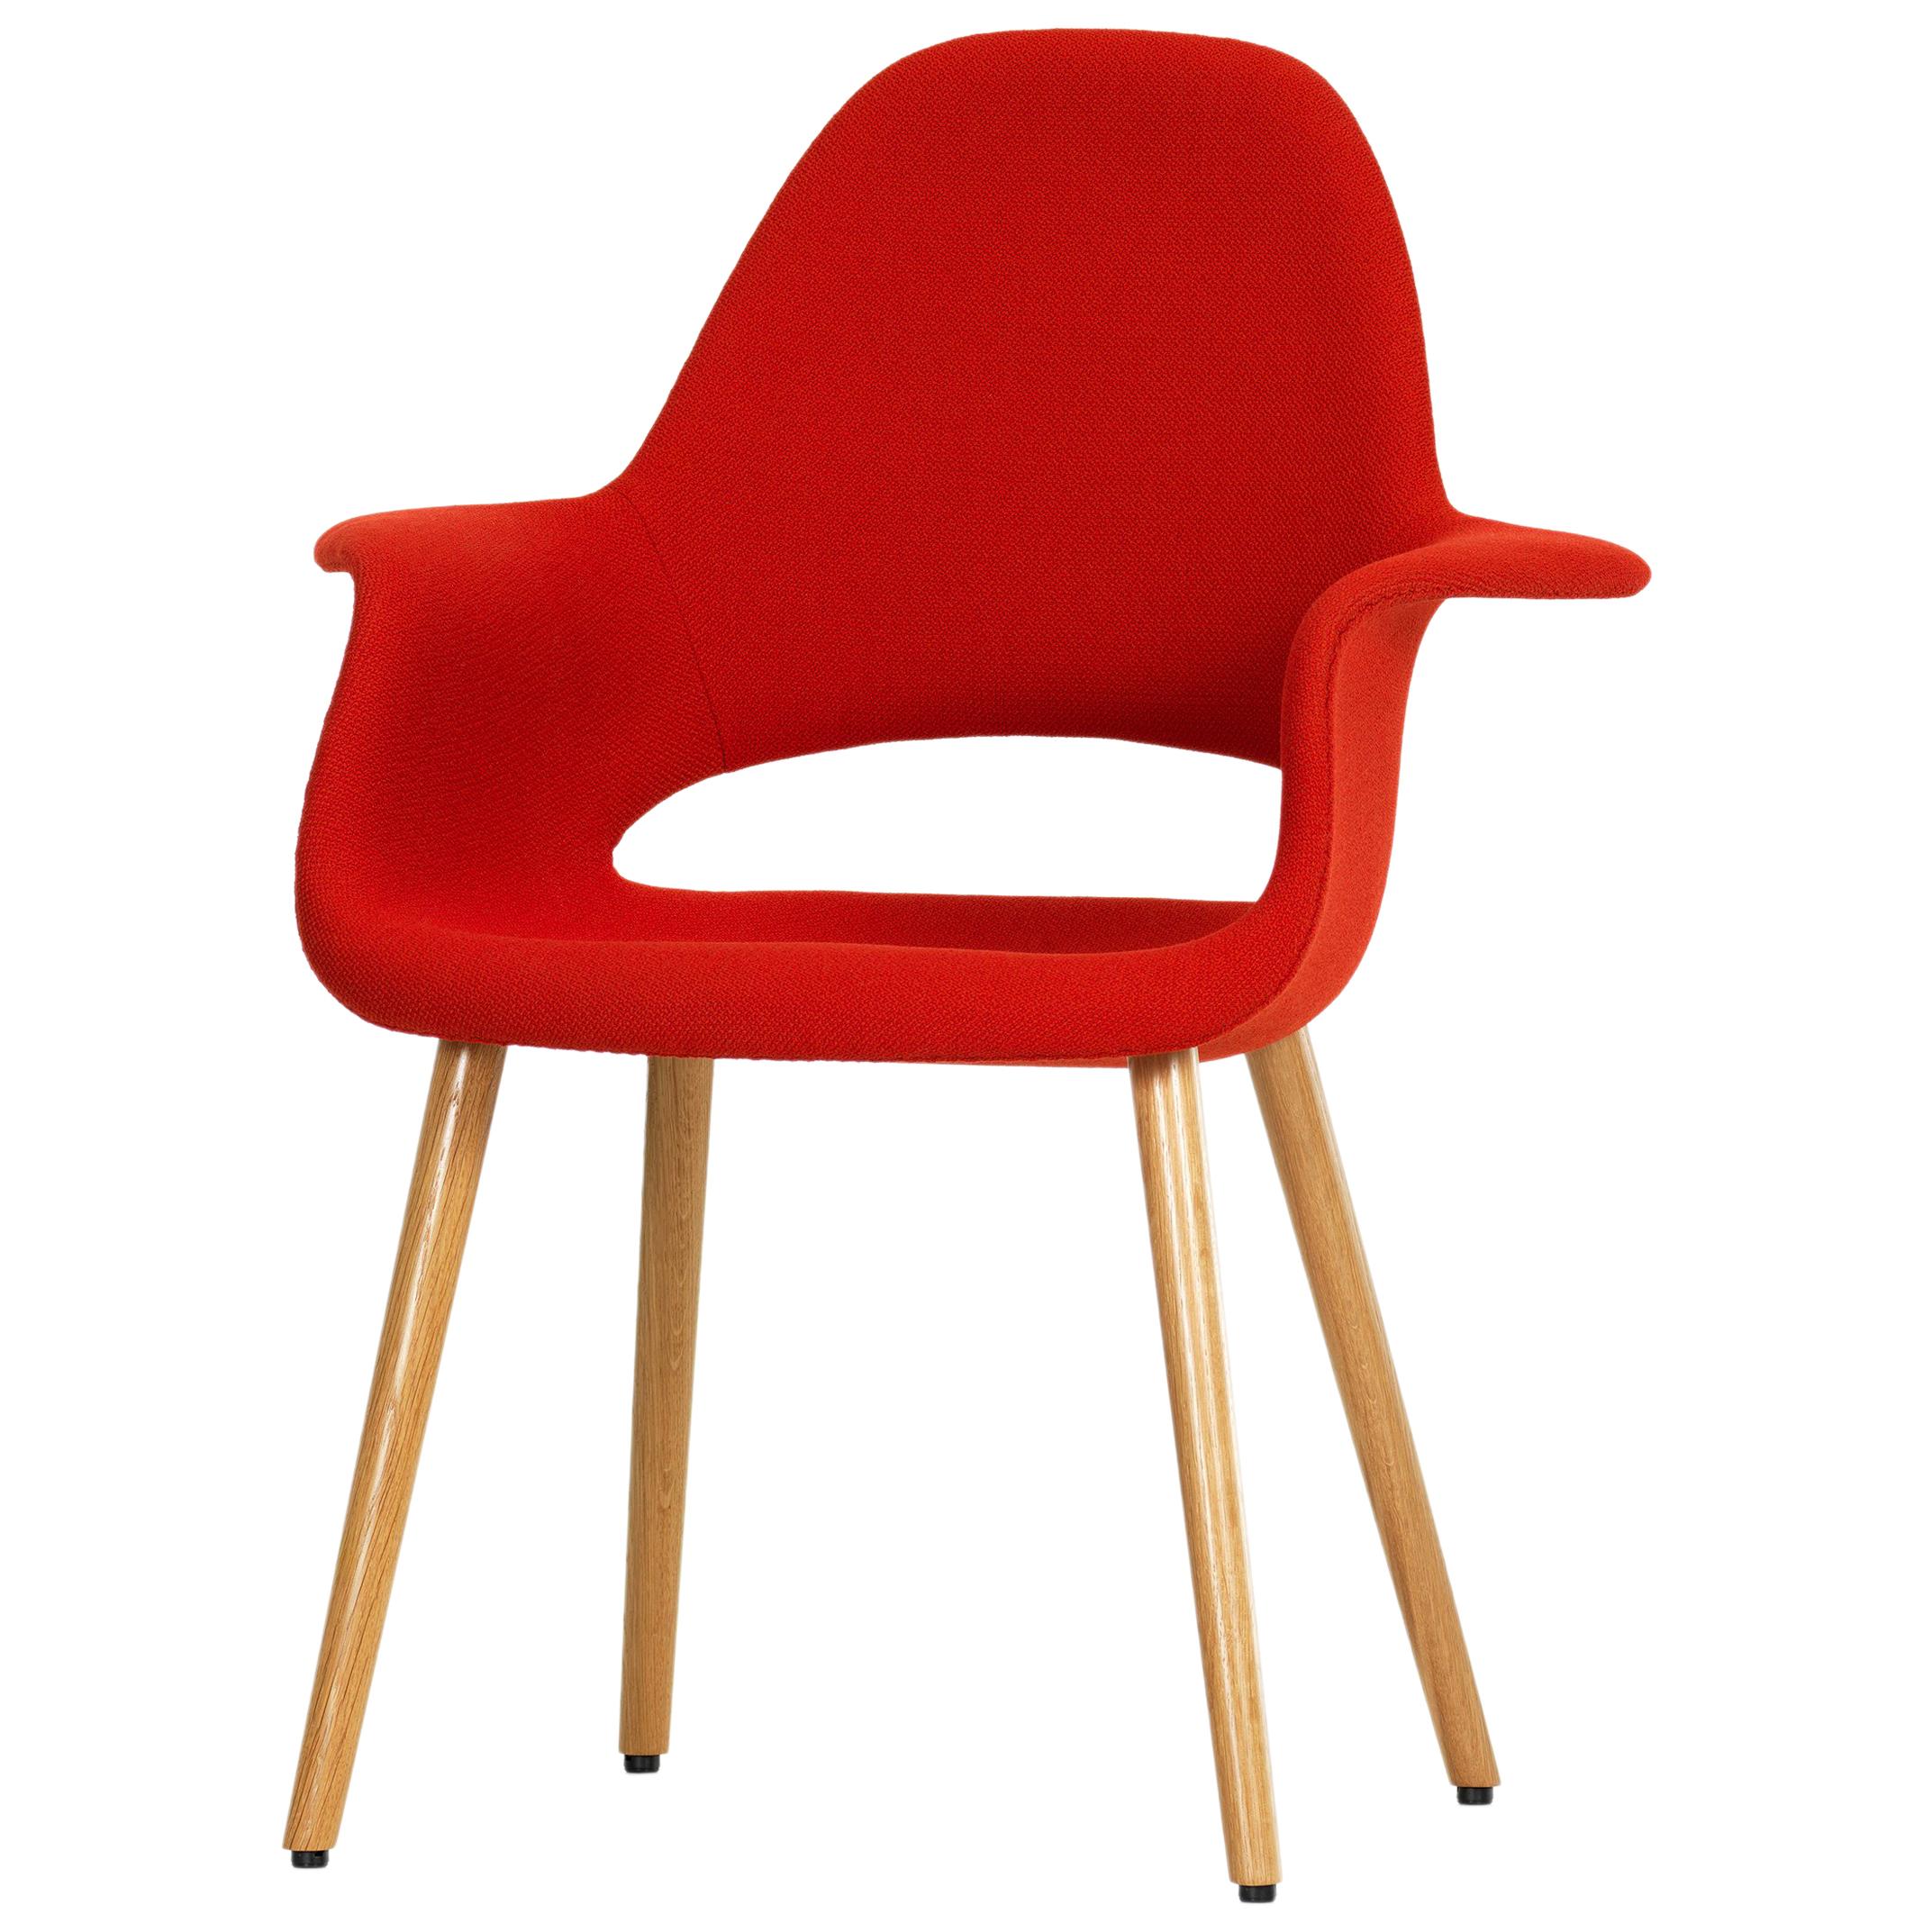 Vitra Organic Conference Chair in Red Chilli by Charles Eames & Eero Saarinen For Sale